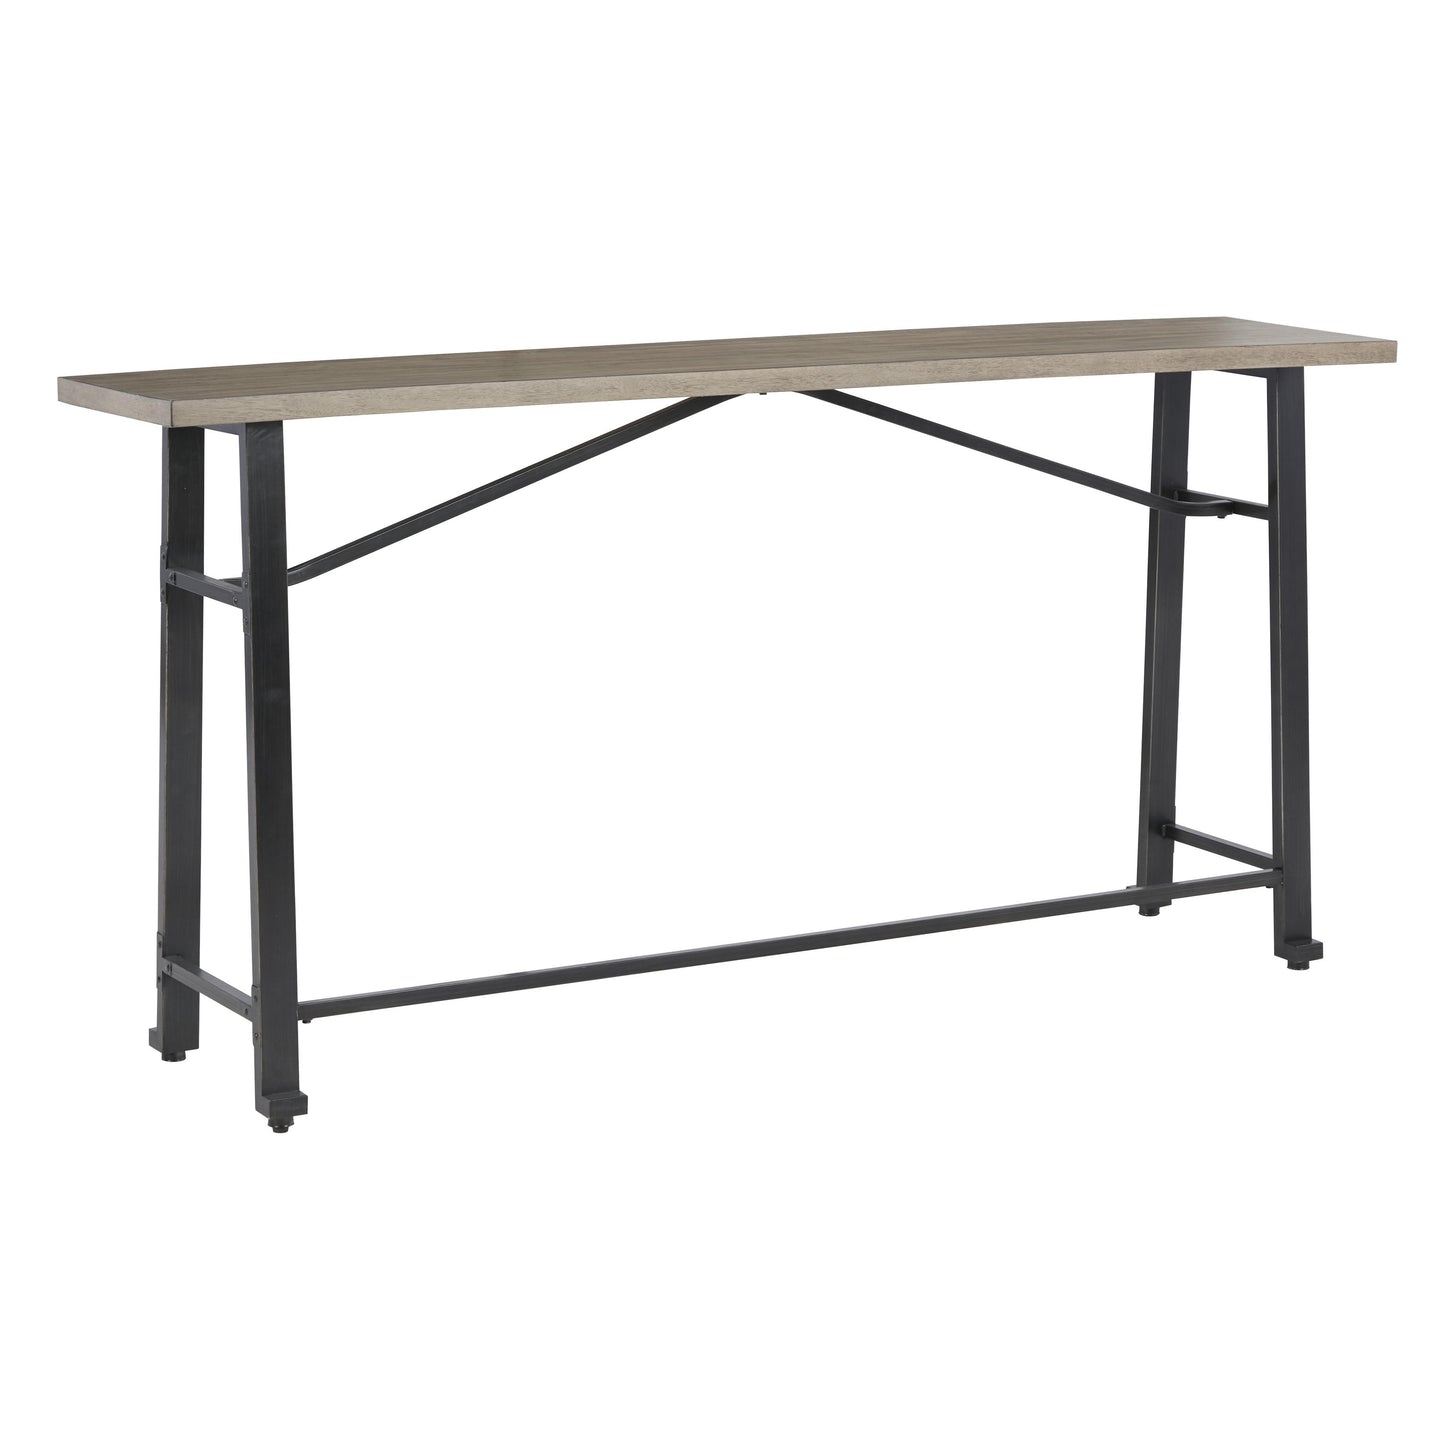 Signature Design by Ashley Lesterton Counter Height Dining Table with Trestle Base D334-52 IMAGE 4